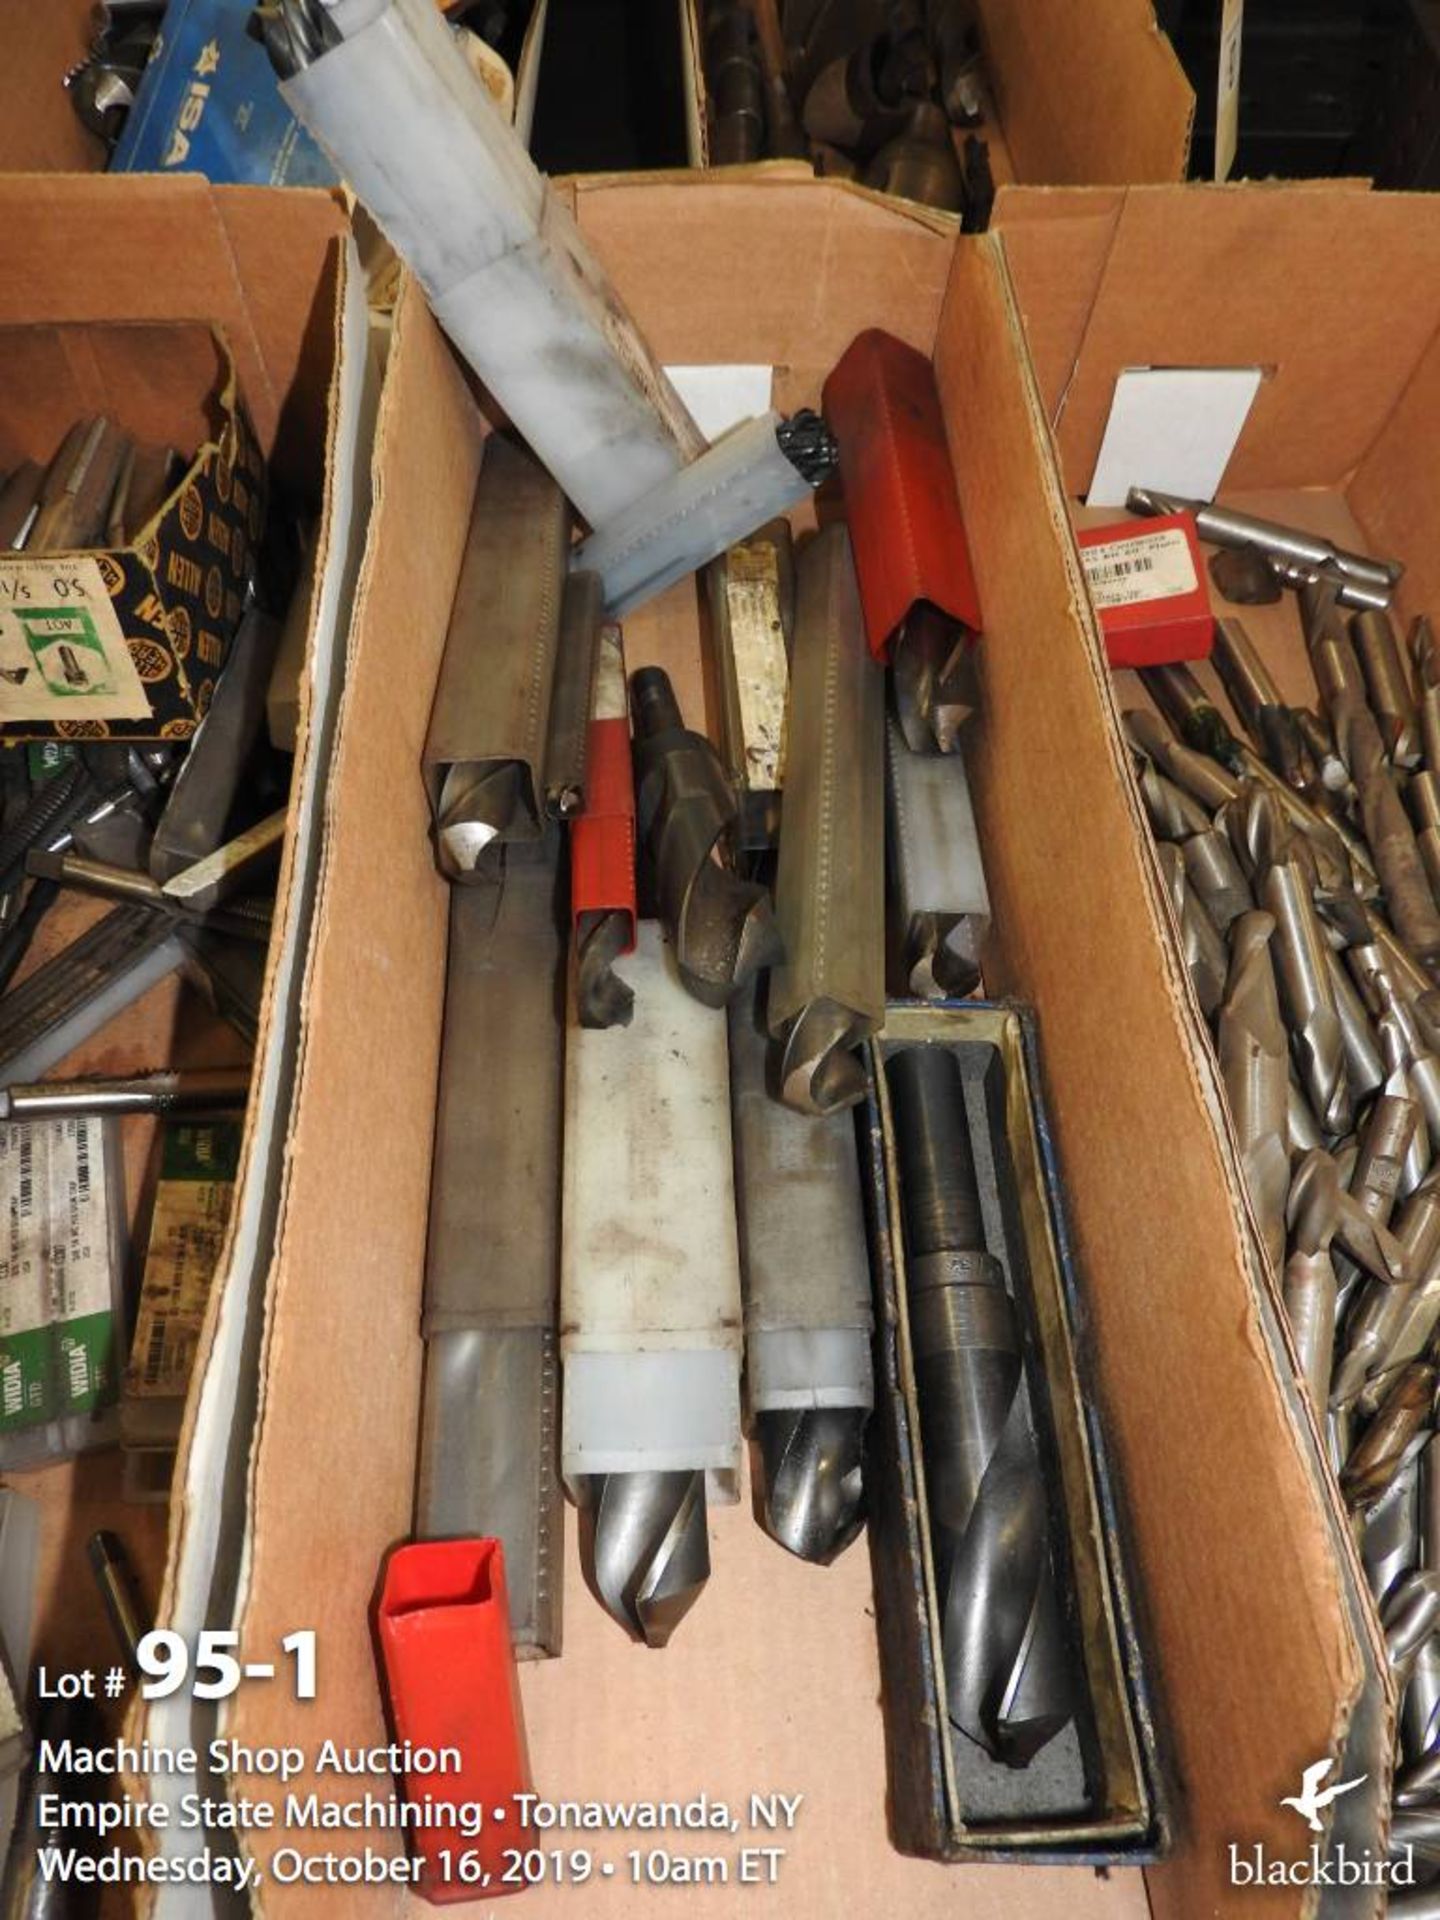 (3) Boxes of miscellaneous drills